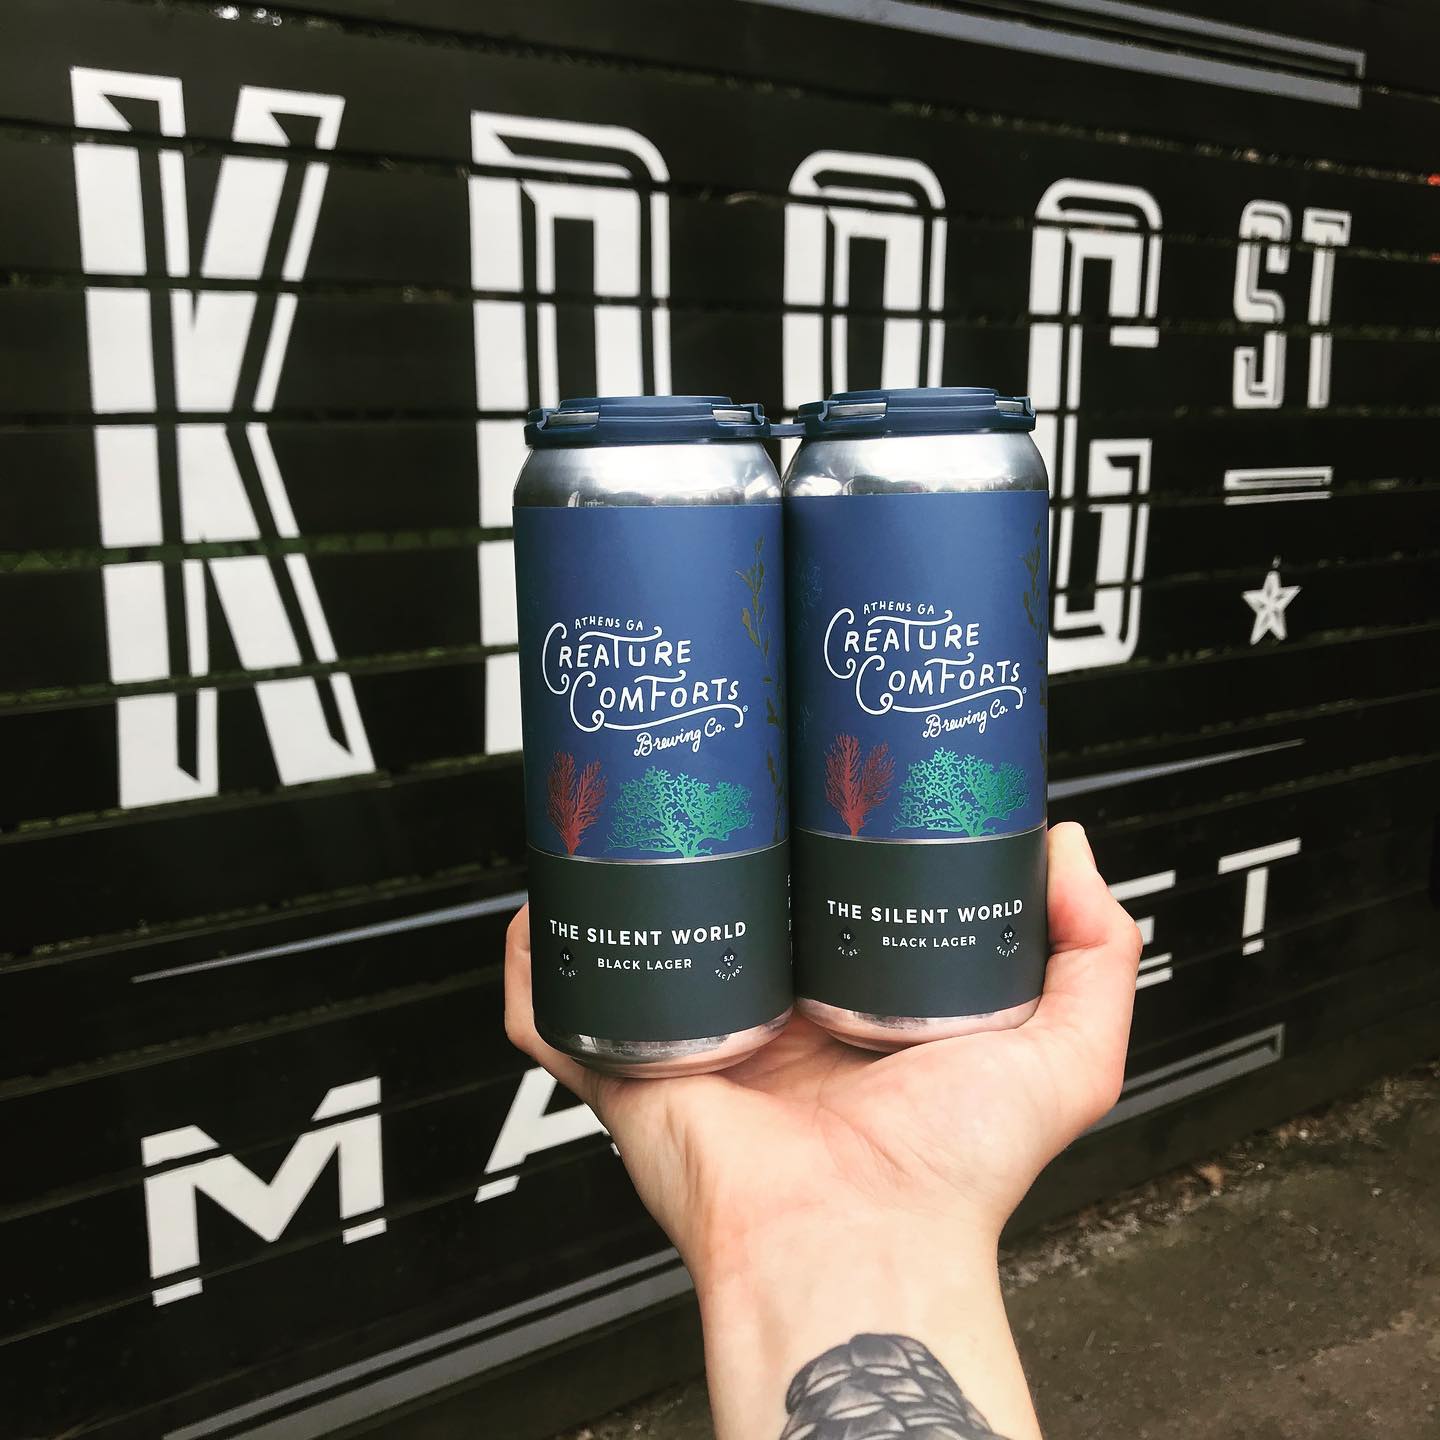 A hand with a tattooed arm holding two cans of Creature Comfort “The Silent World” black lager in front of the black painted wall with the white Krog Street Market logo on it